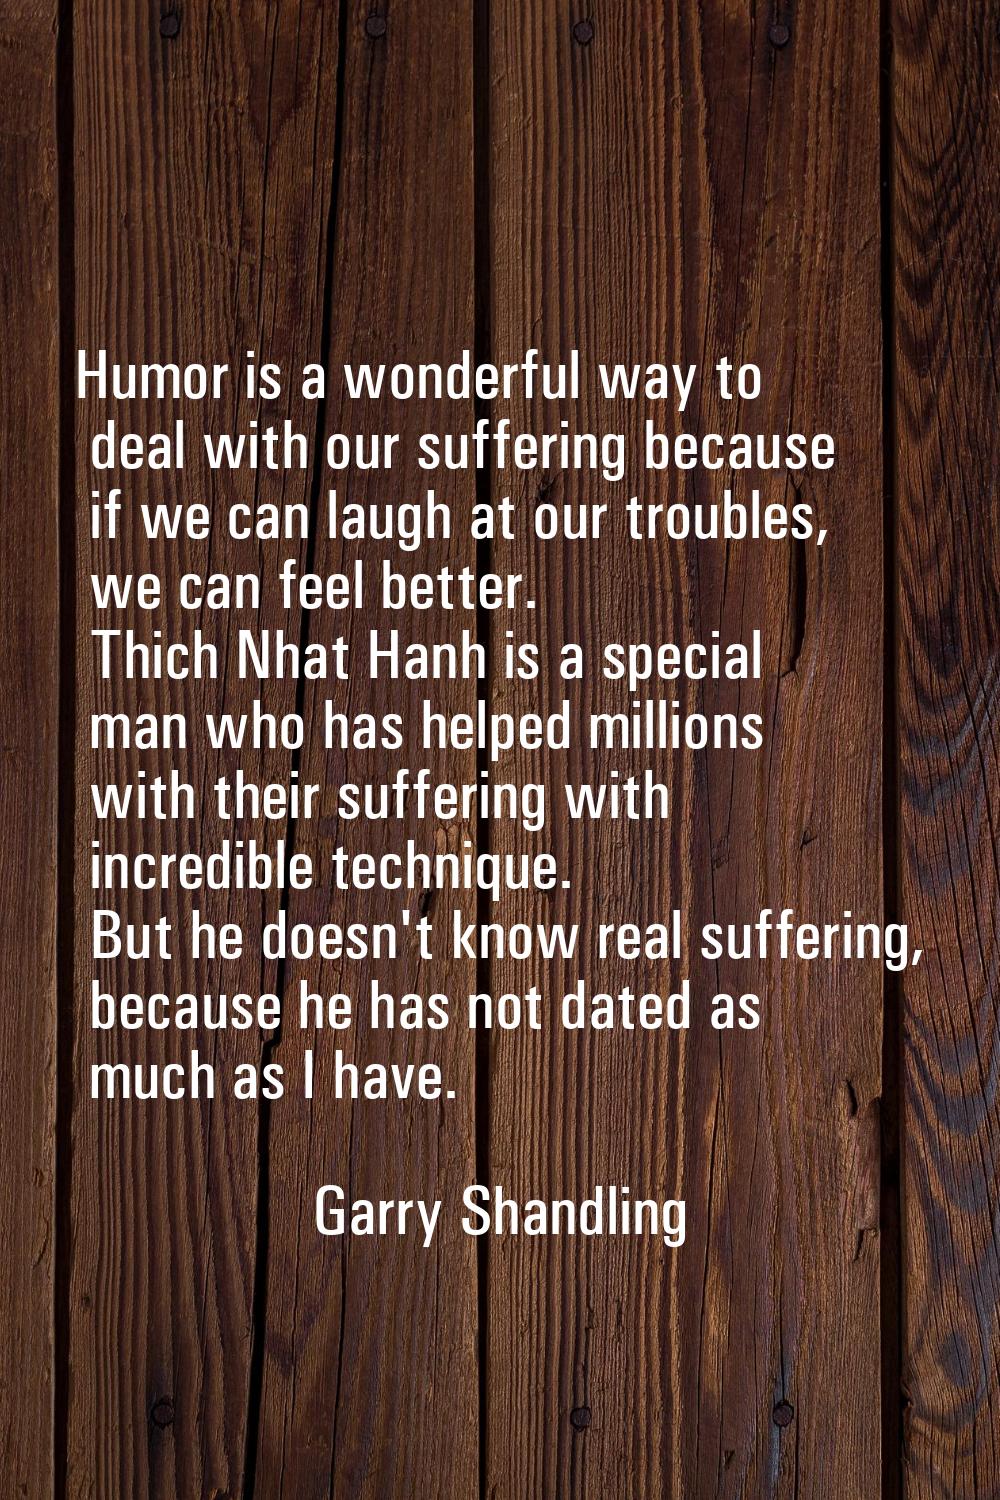 Humor is a wonderful way to deal with our suffering because if we can laugh at our troubles, we can